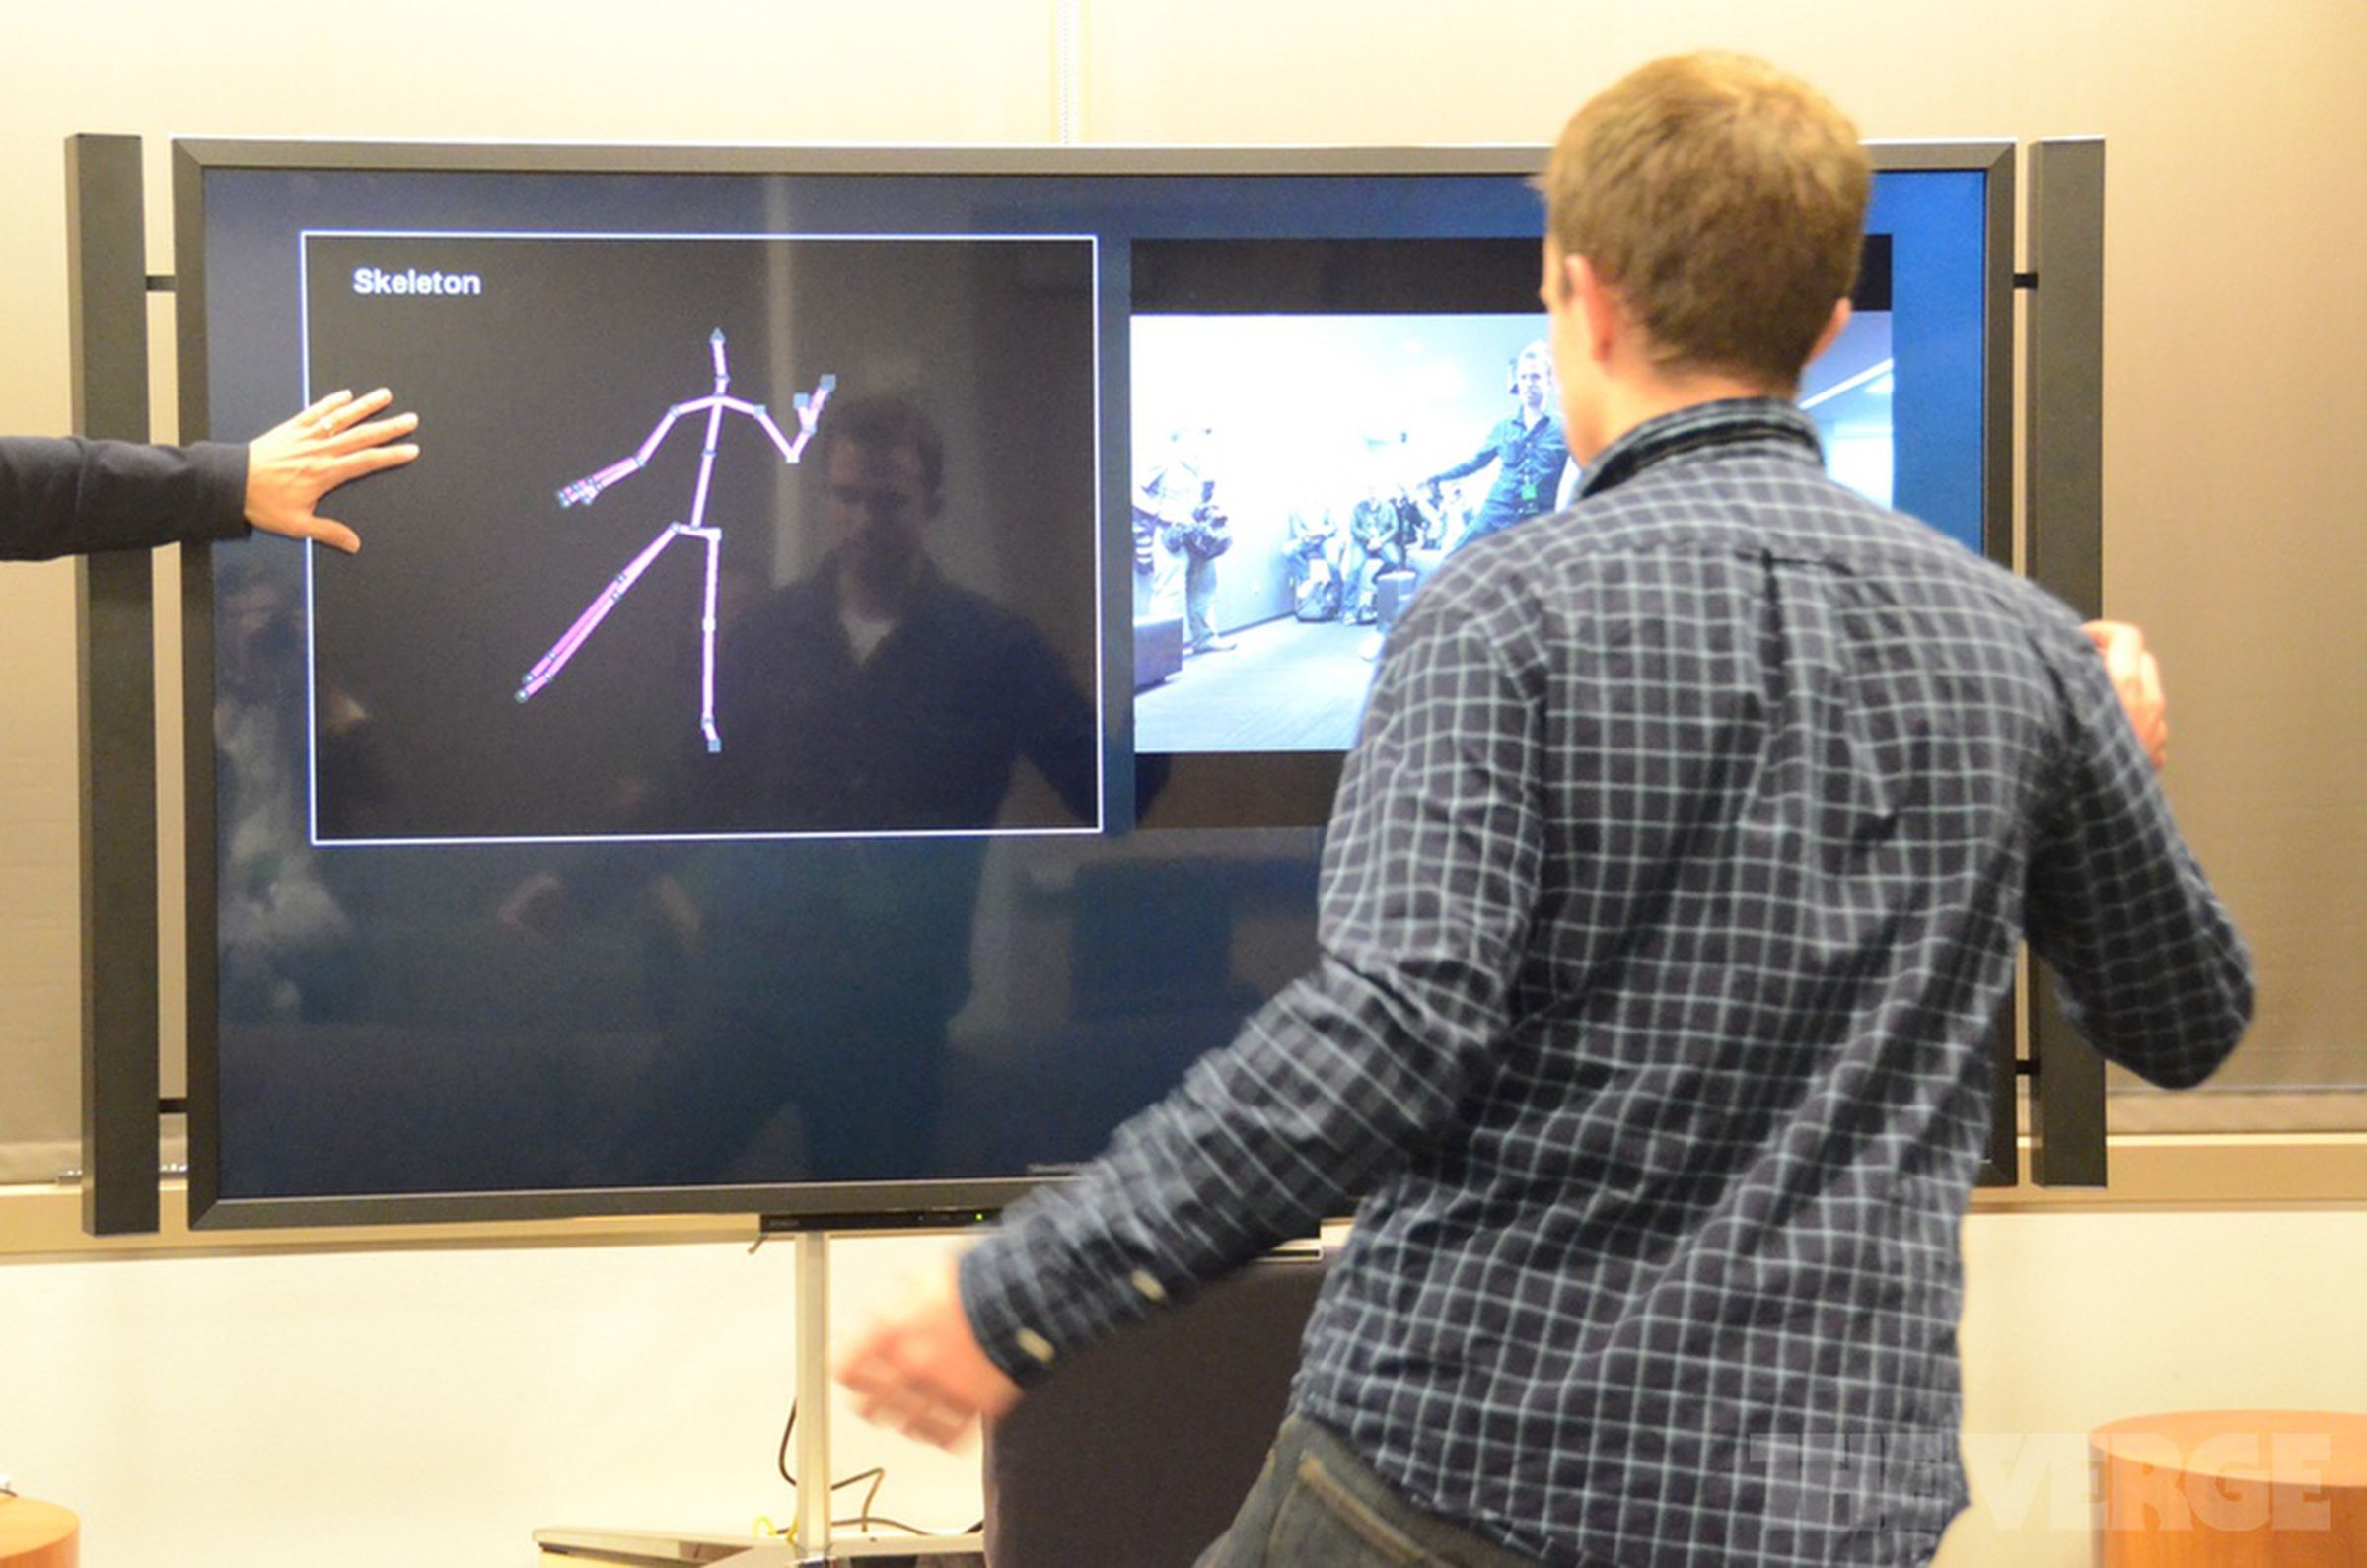 Xbox One Kinect hands on photos